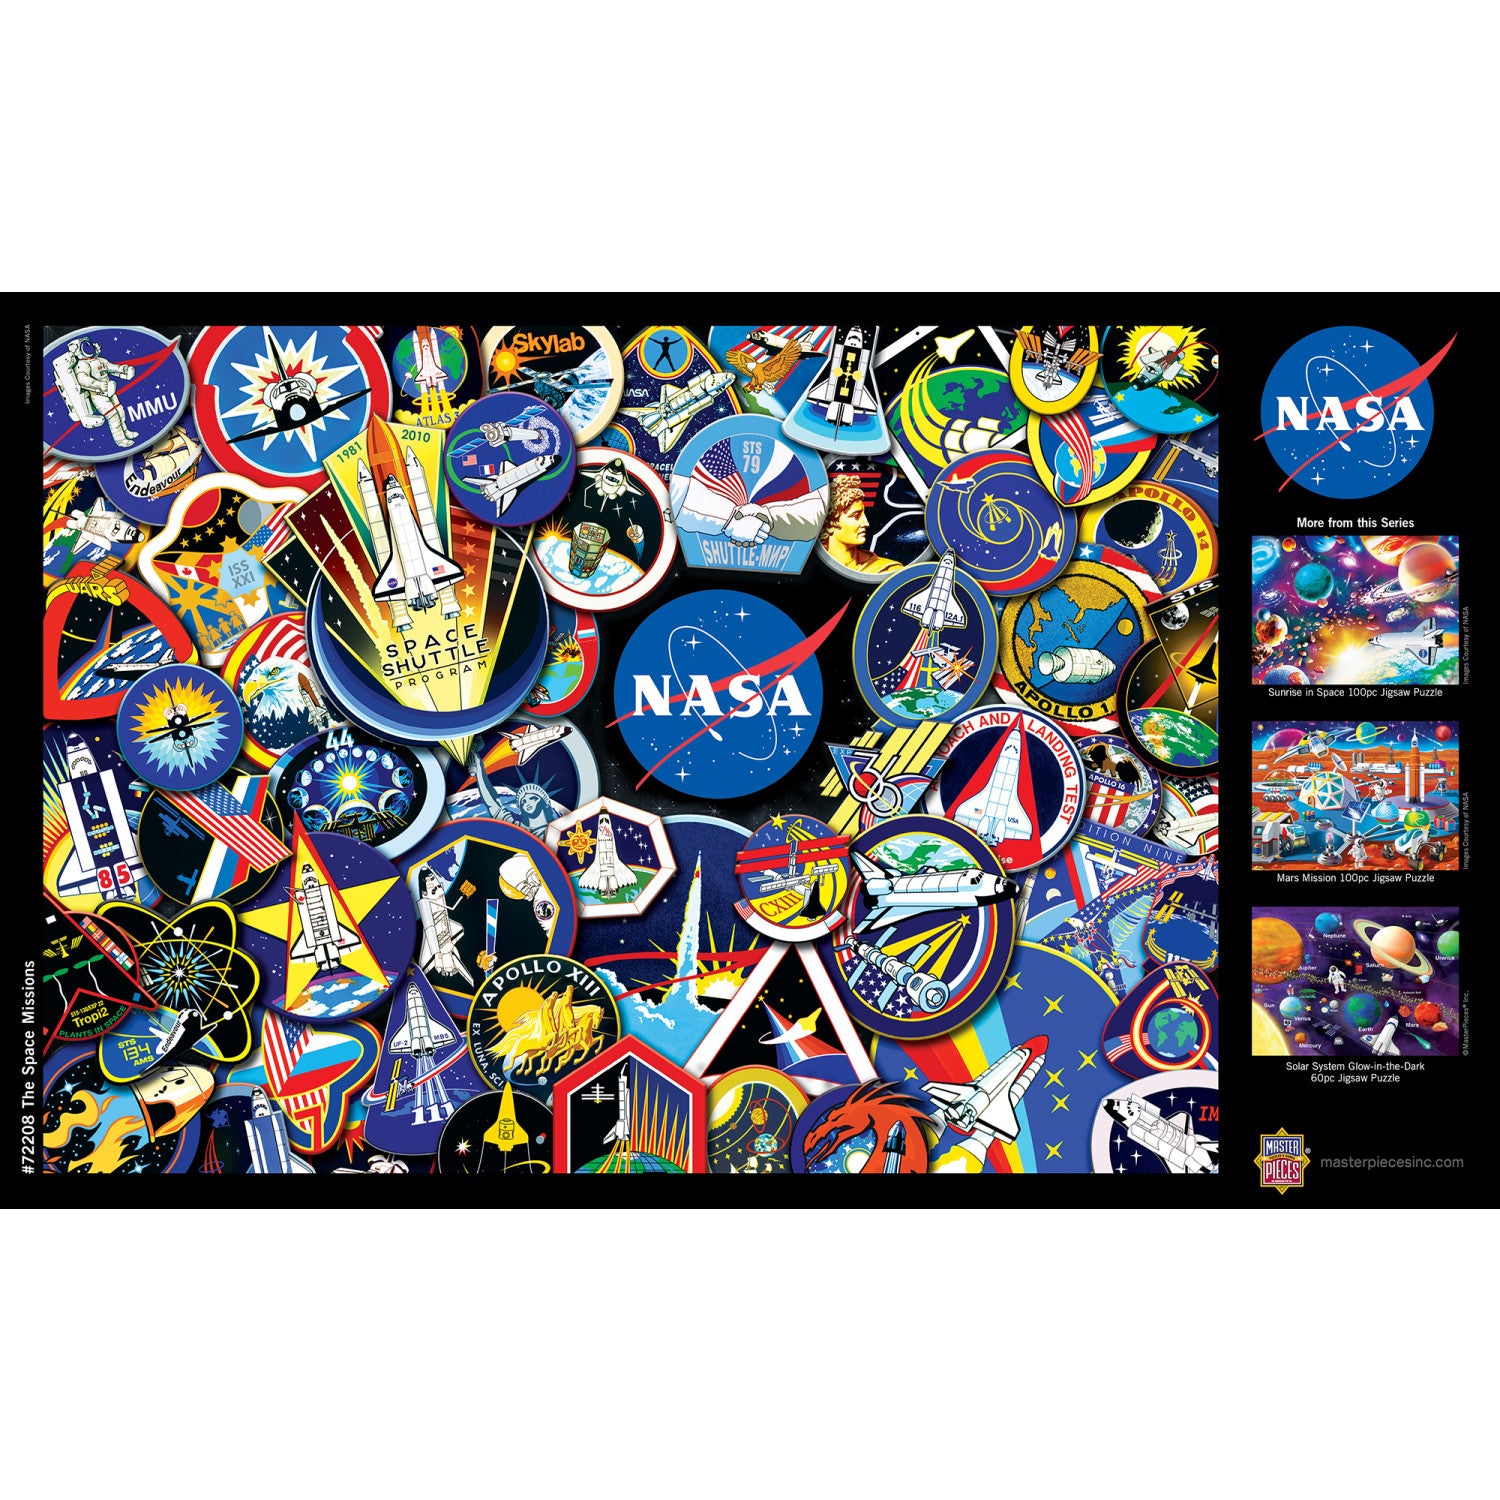 The Space Missions - 1000 Piece Jigsaw Puzzle